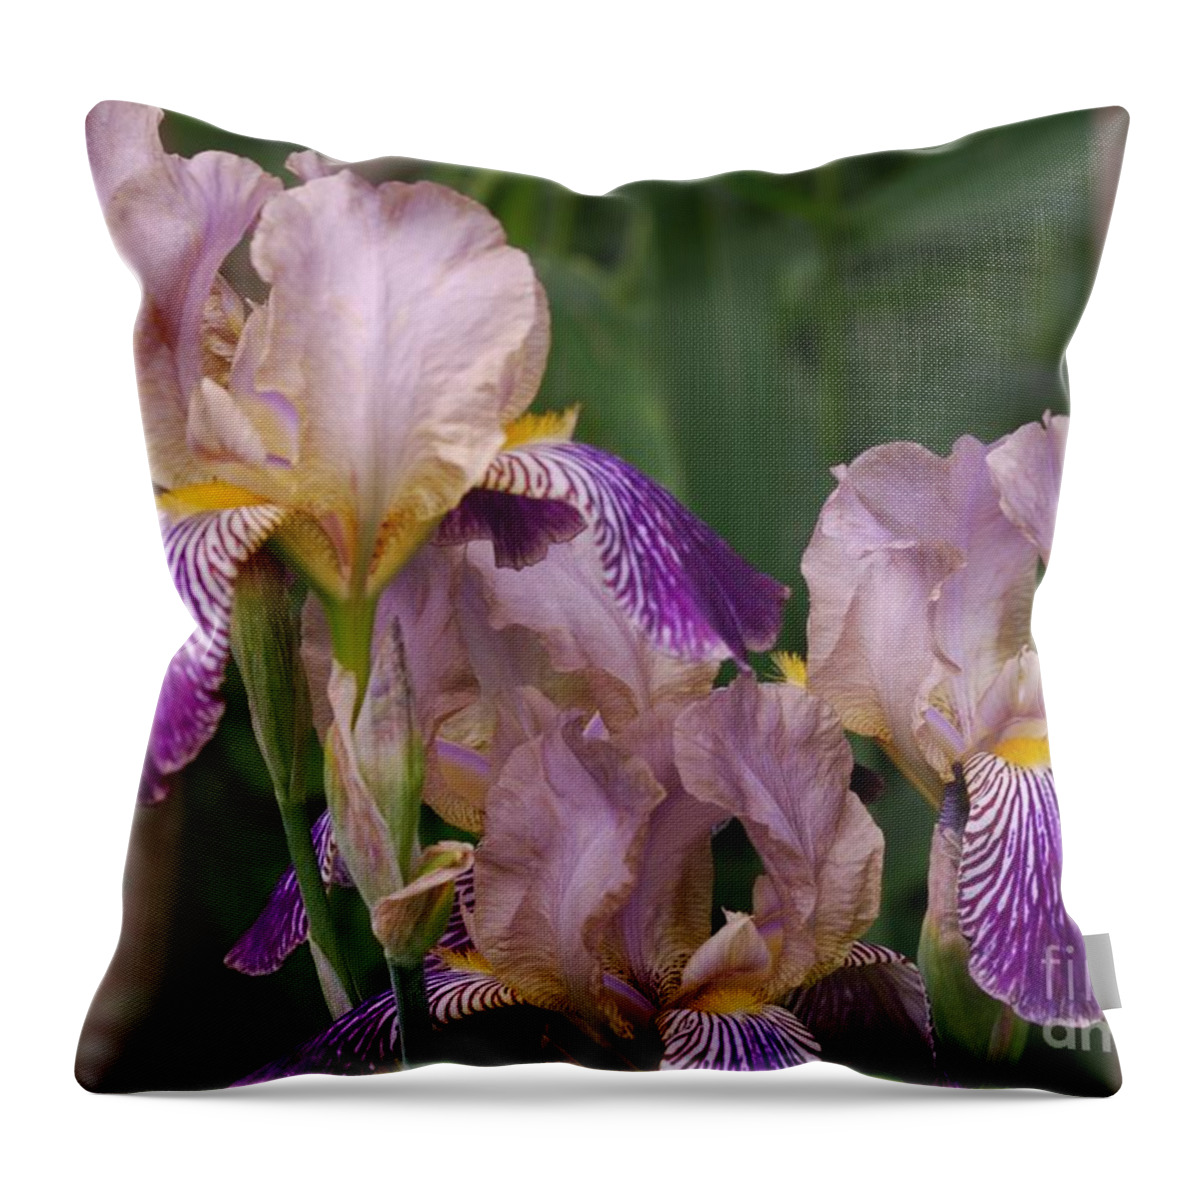 Iris Throw Pillow featuring the photograph Old-fashioned Iris by Randy Bodkins